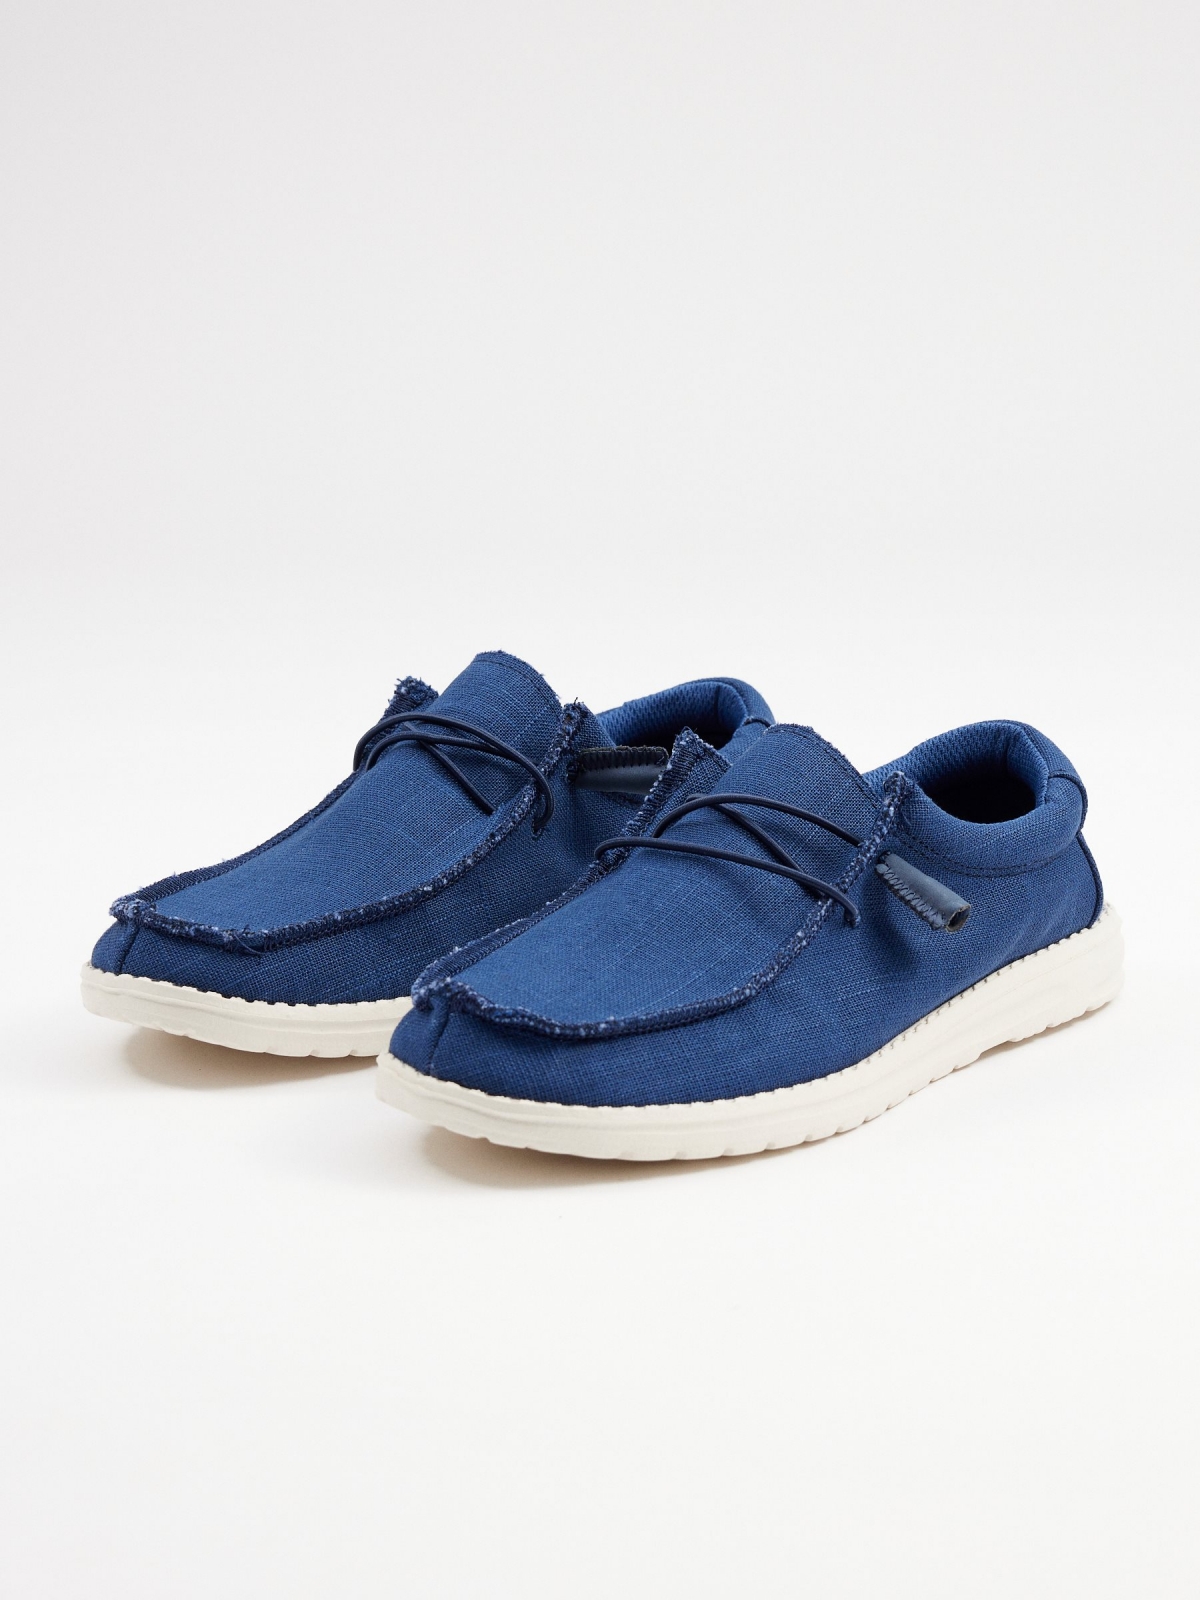 Sneaker canvas washed elastic dark blue 45º front view